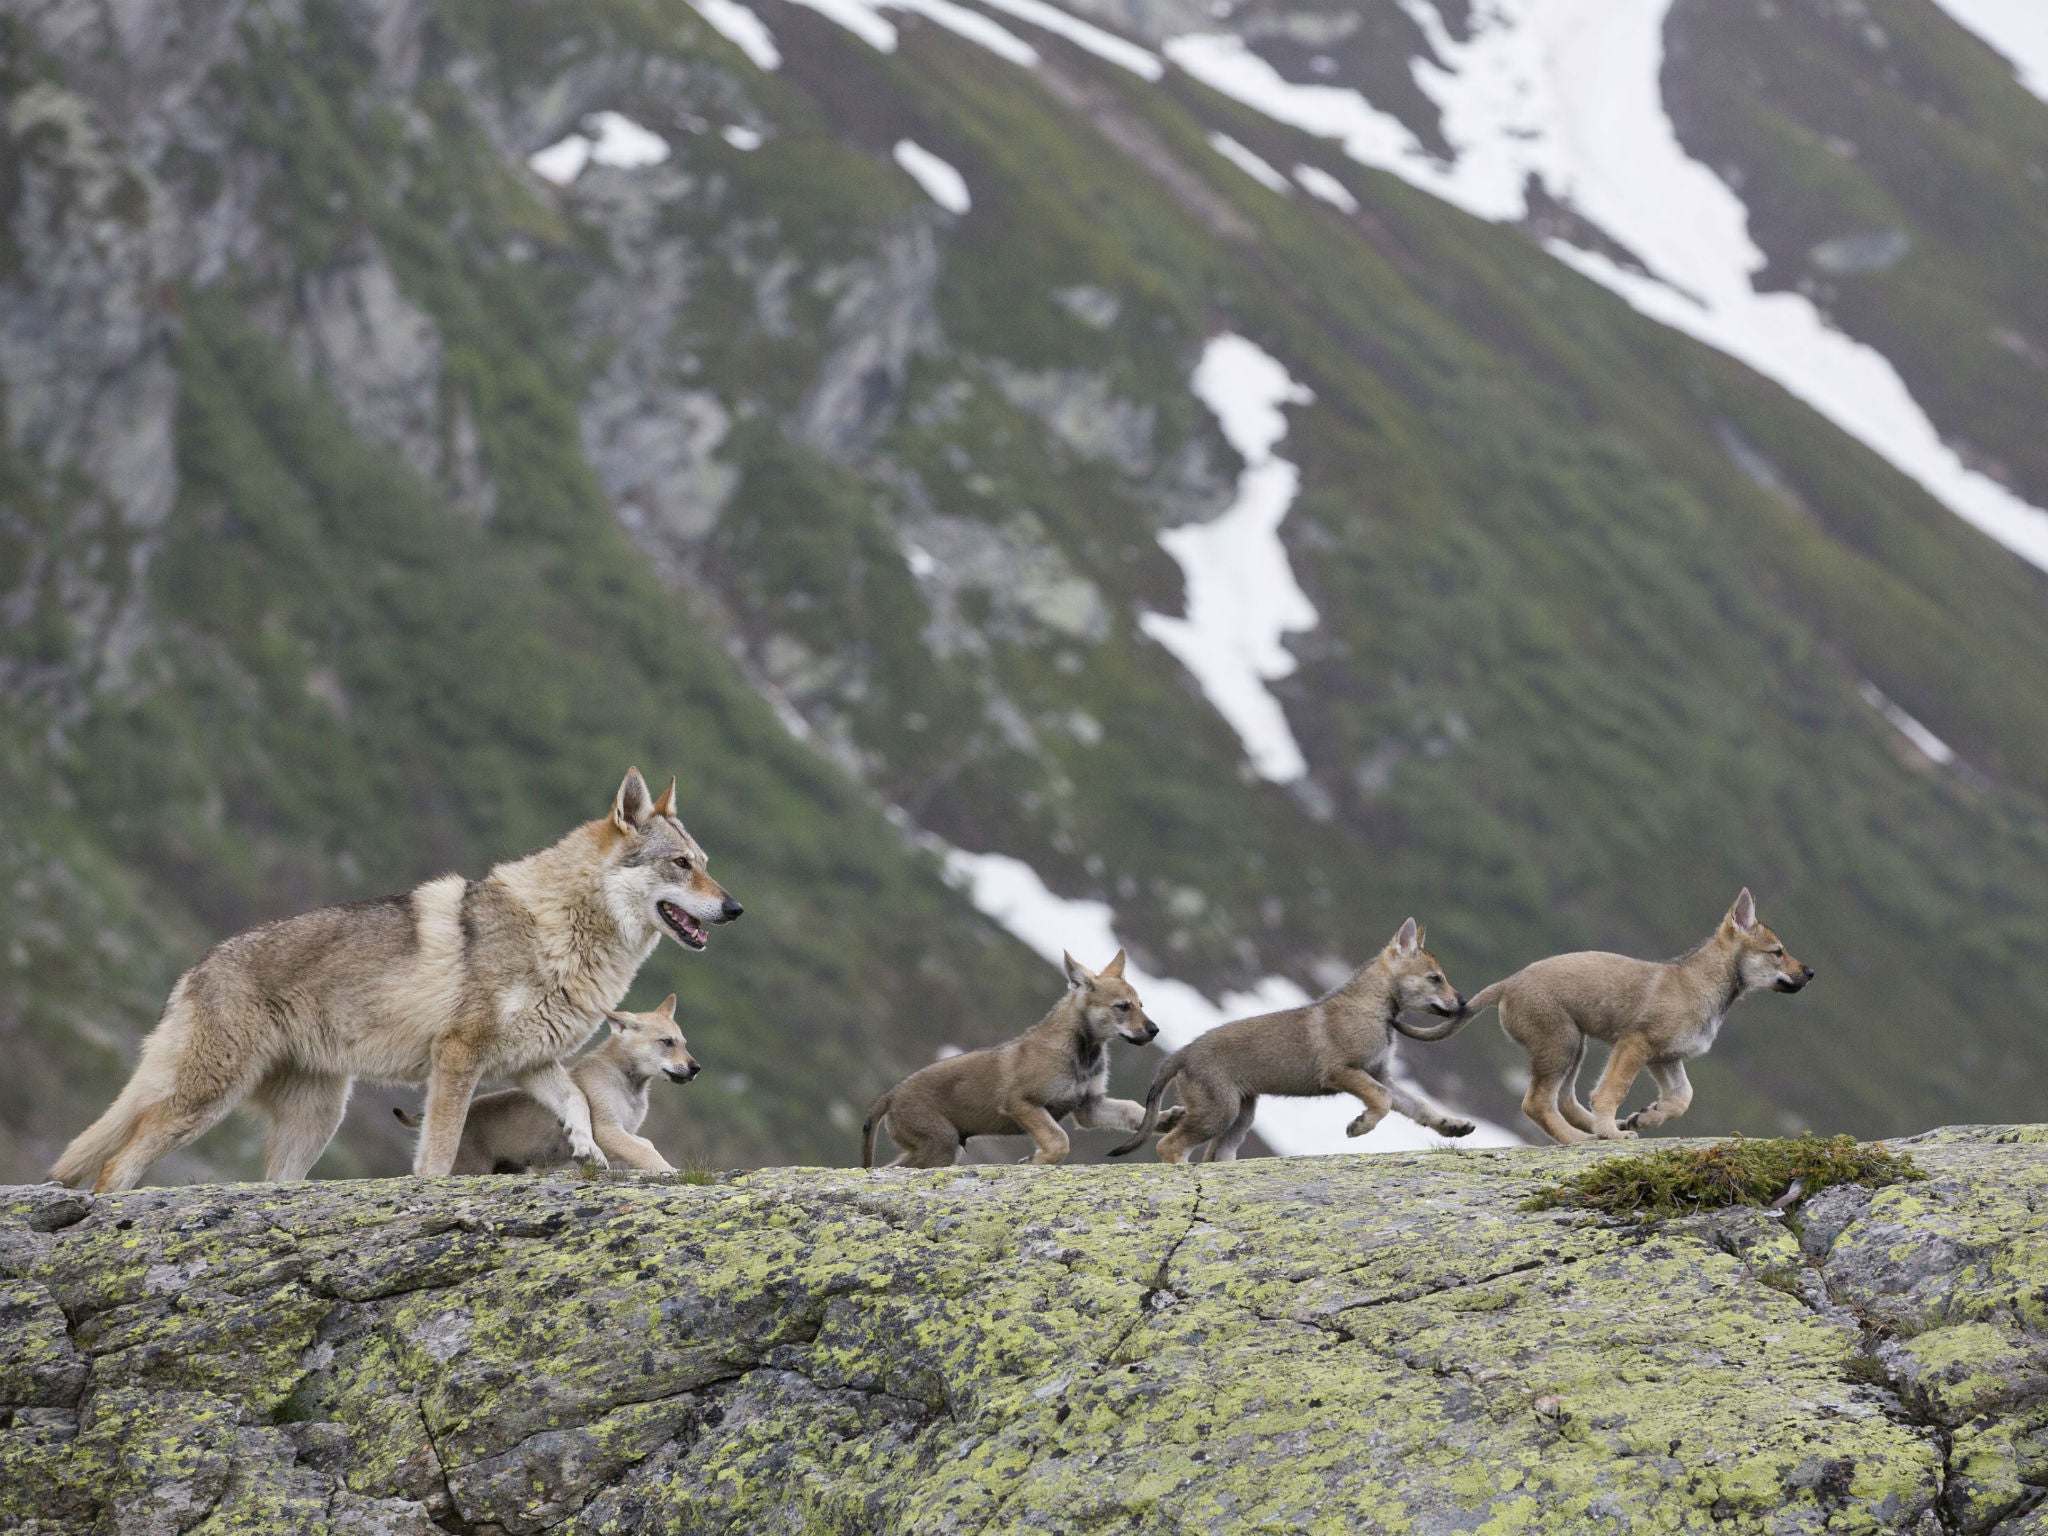 'The Snow Wolf: A Winter's Tale' follows a female wolf and her cubs through the Dolomites